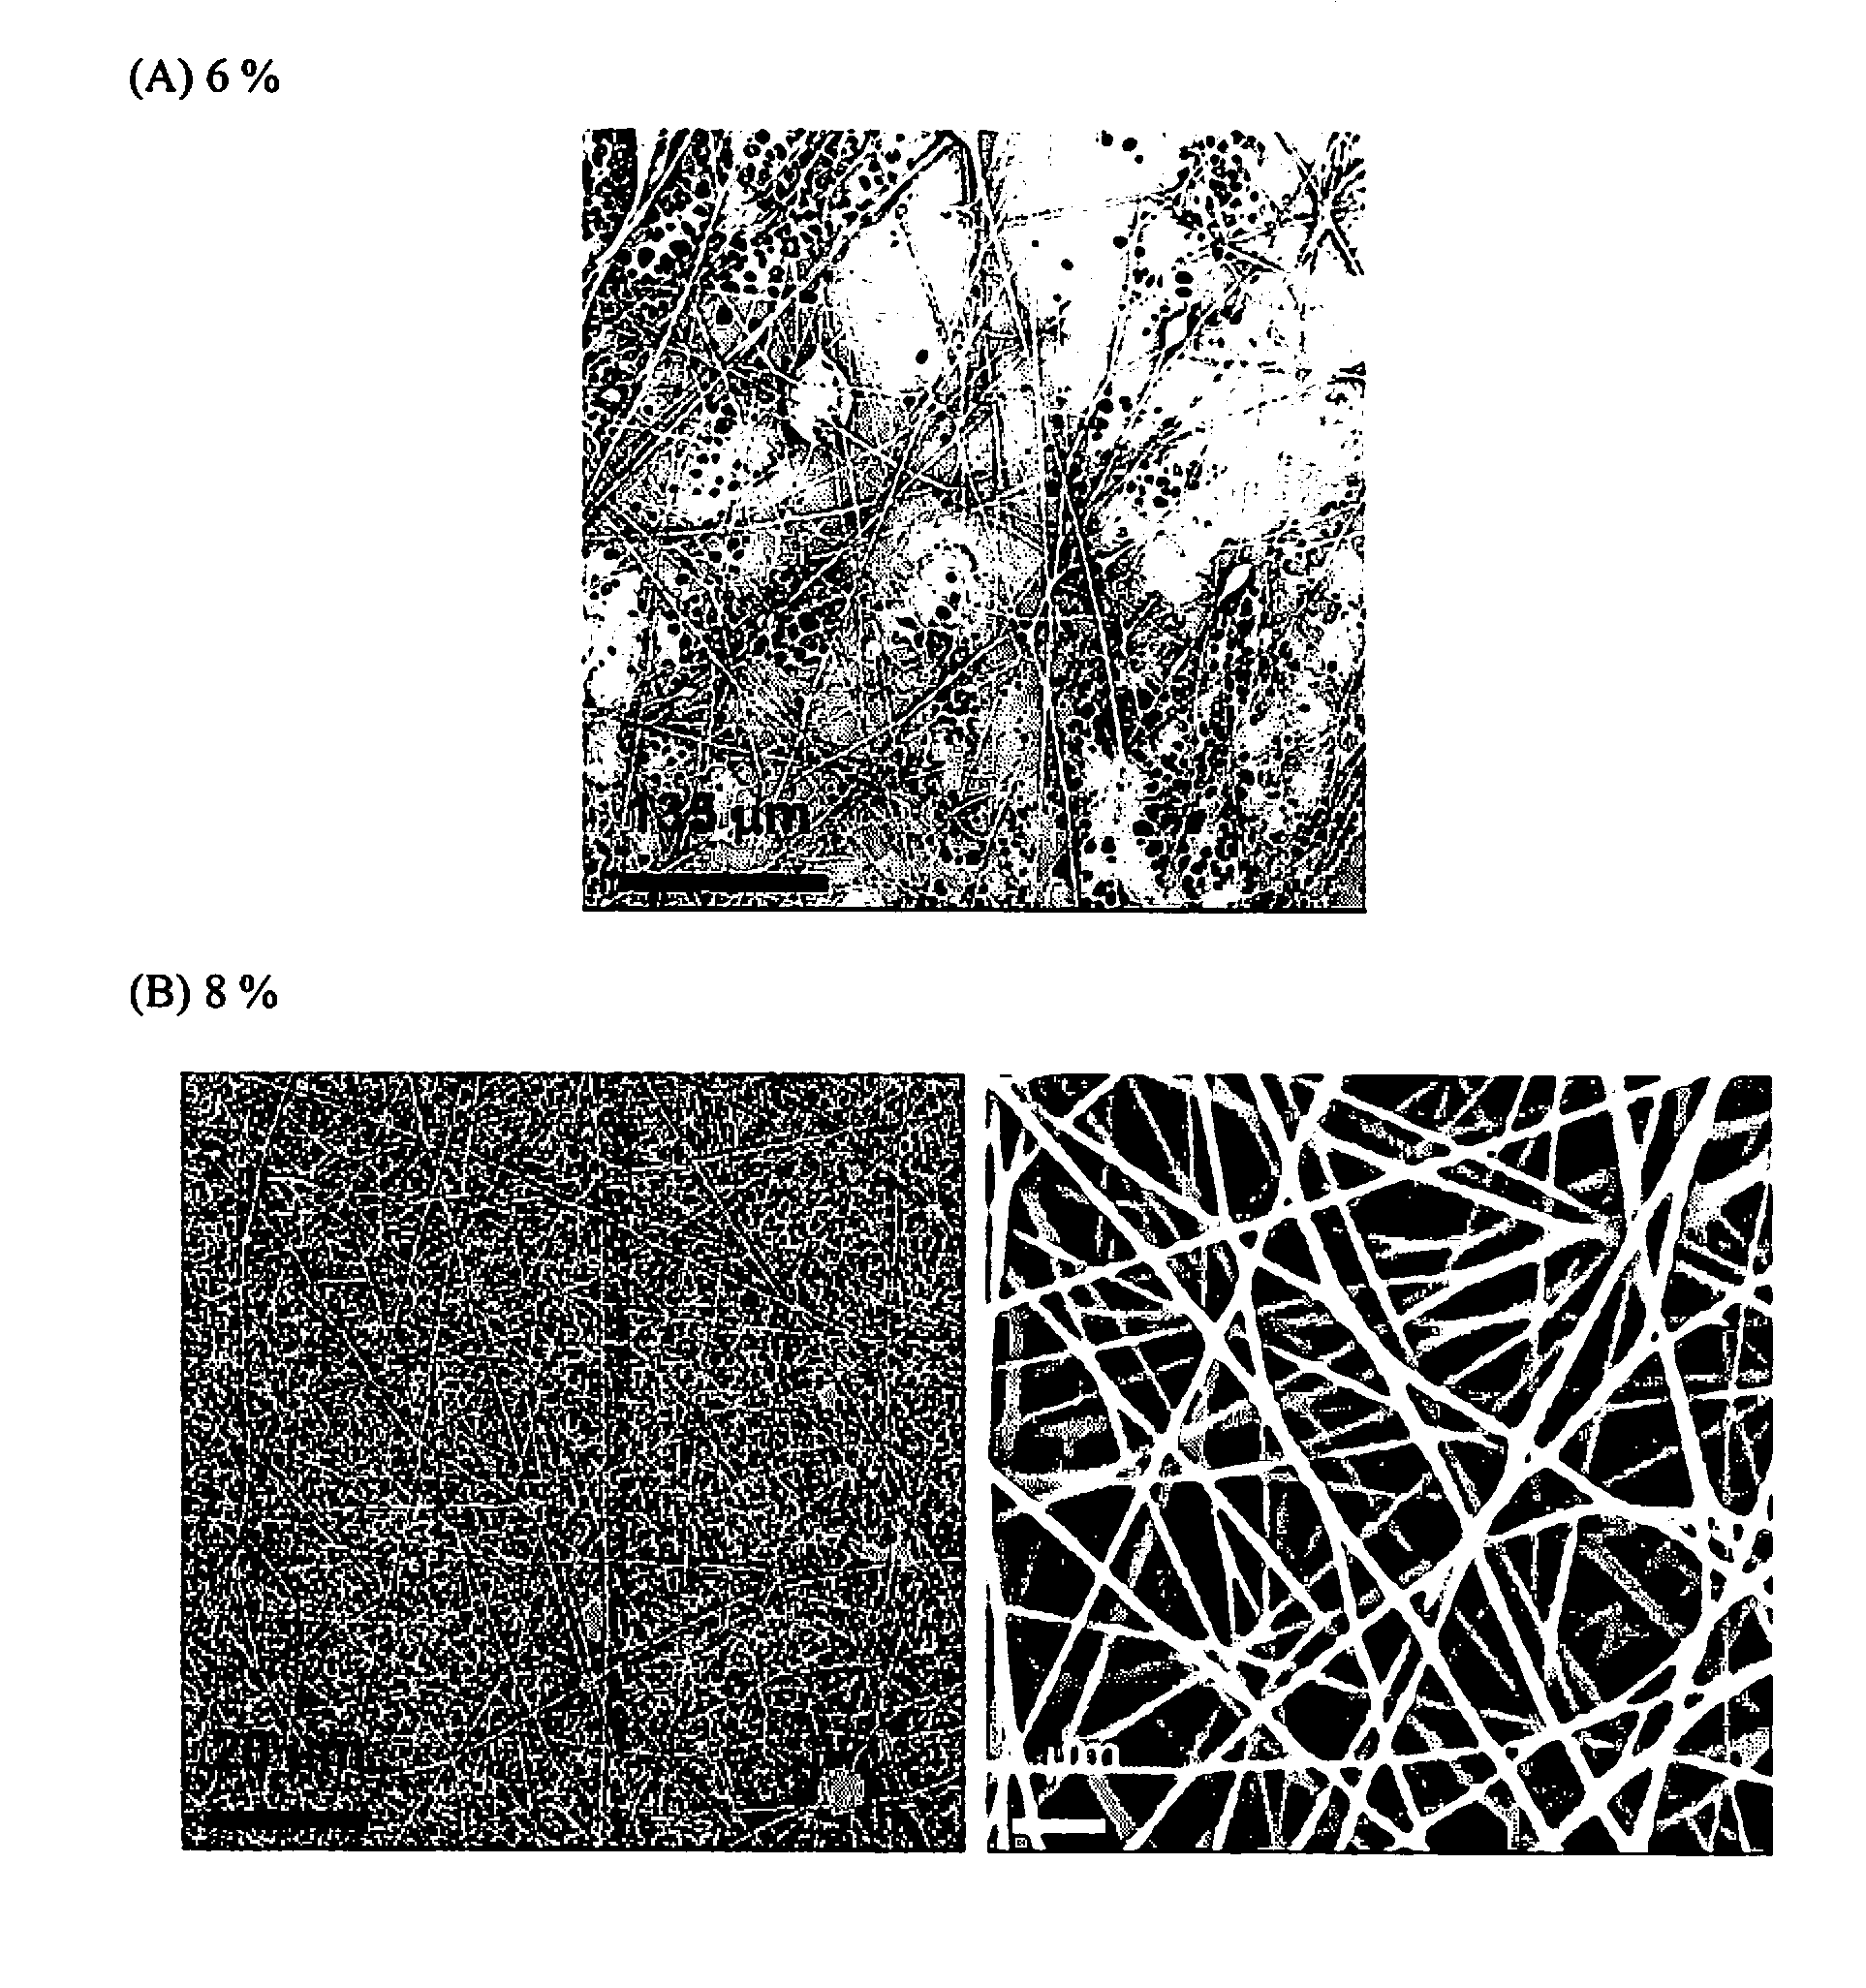 High flux high efficiency nanofiber membranes and methods of production thereof